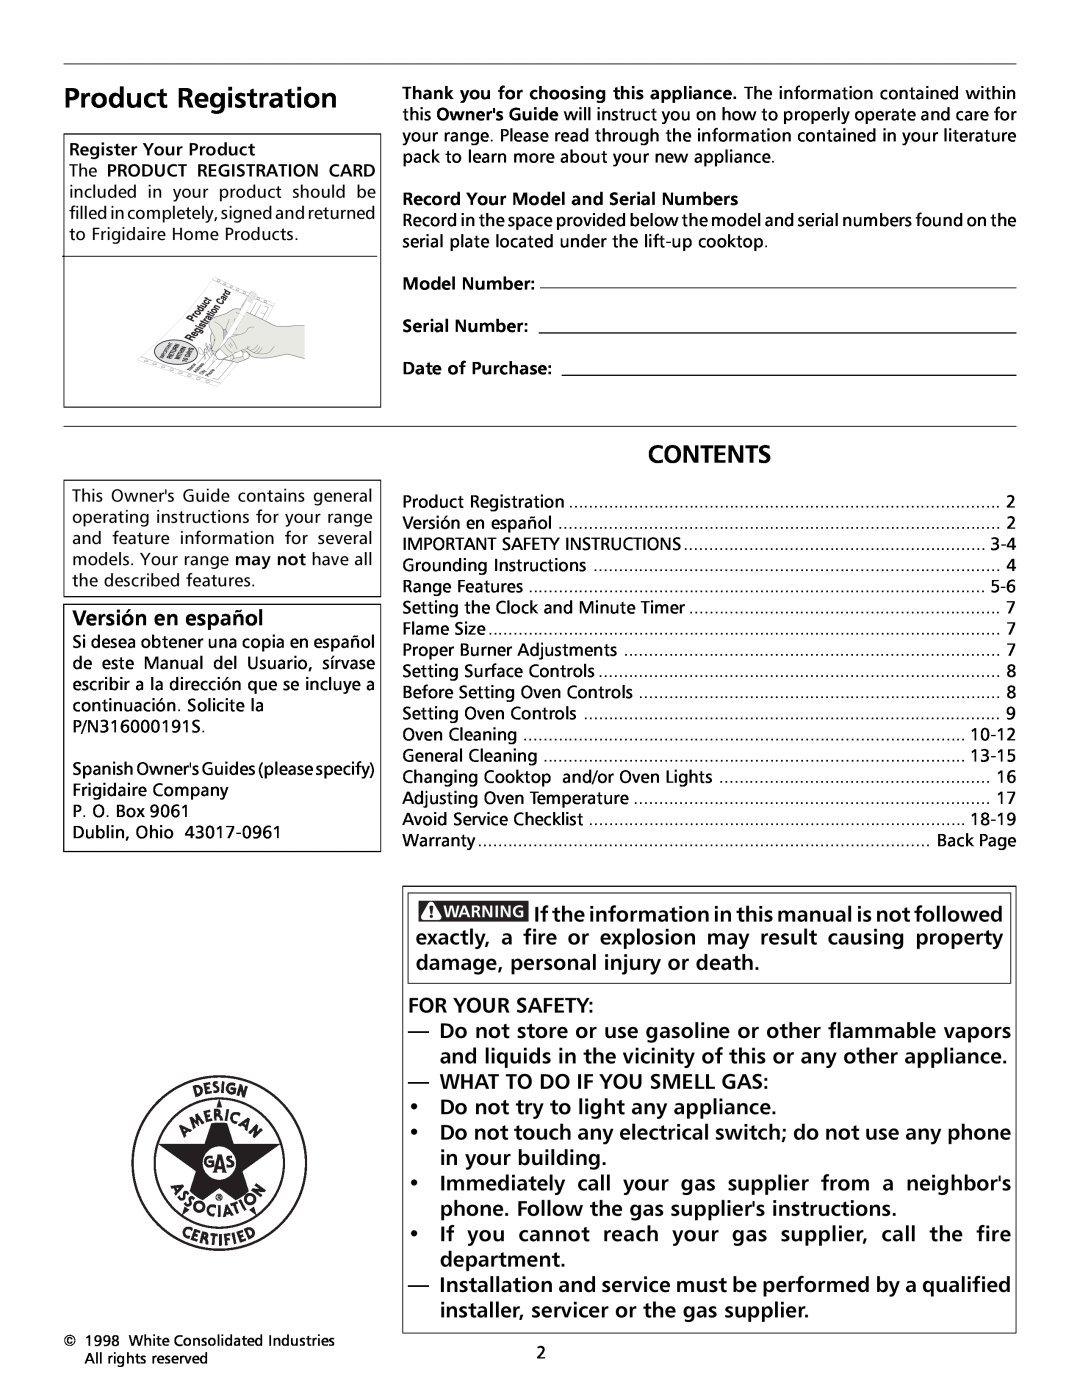 Tappan 316000191 manual Product Registration, Contents 